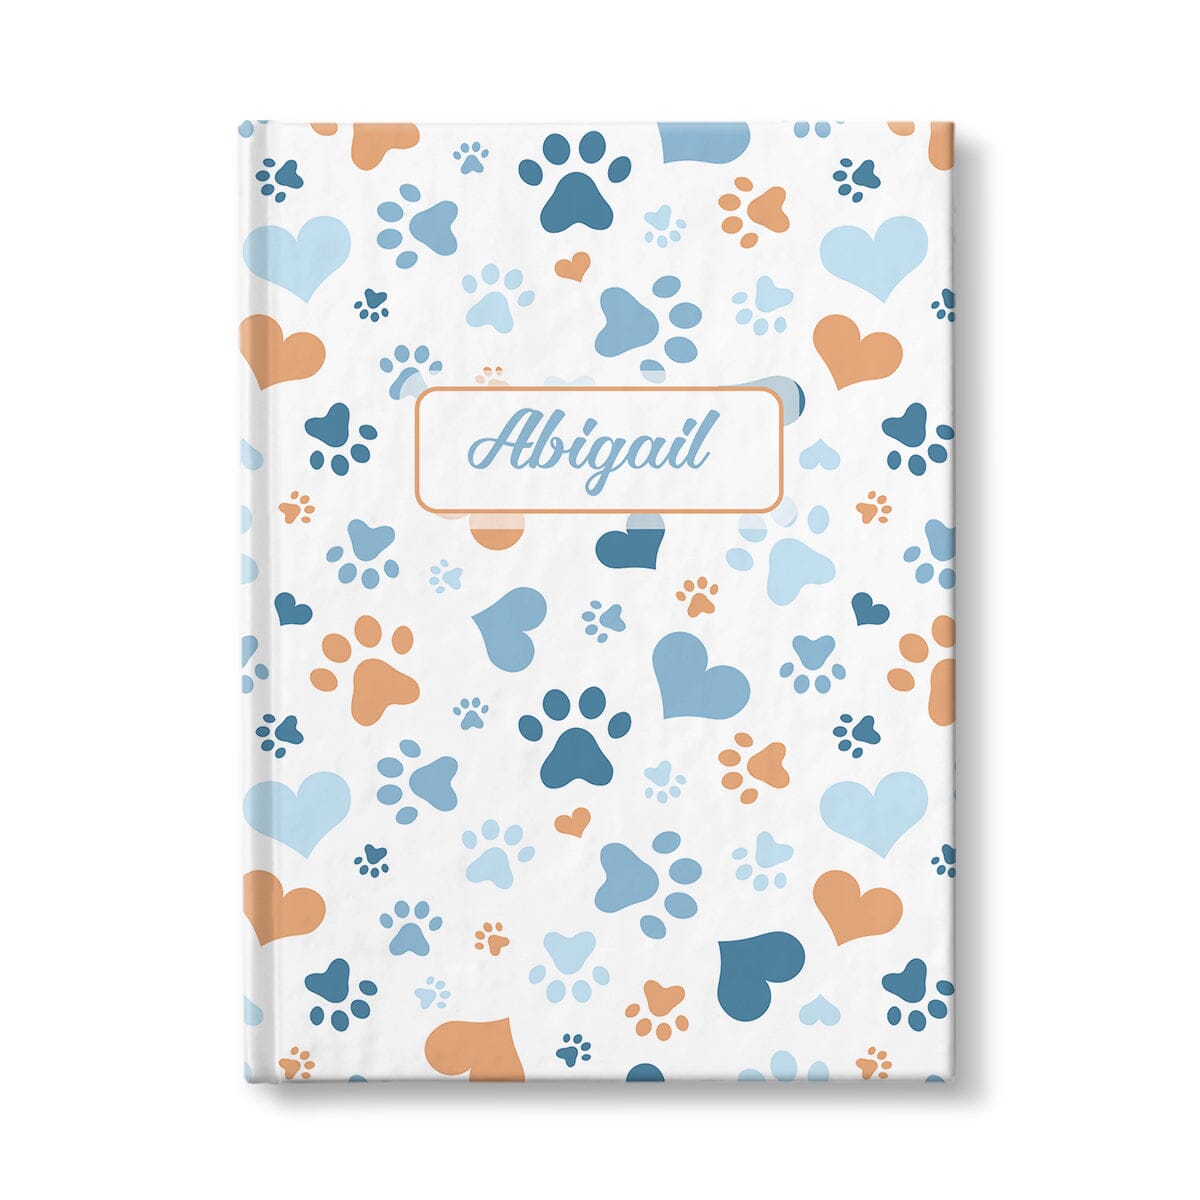 Personalized Blue Hearts and Paw Prints Journal at Artistically Invited.